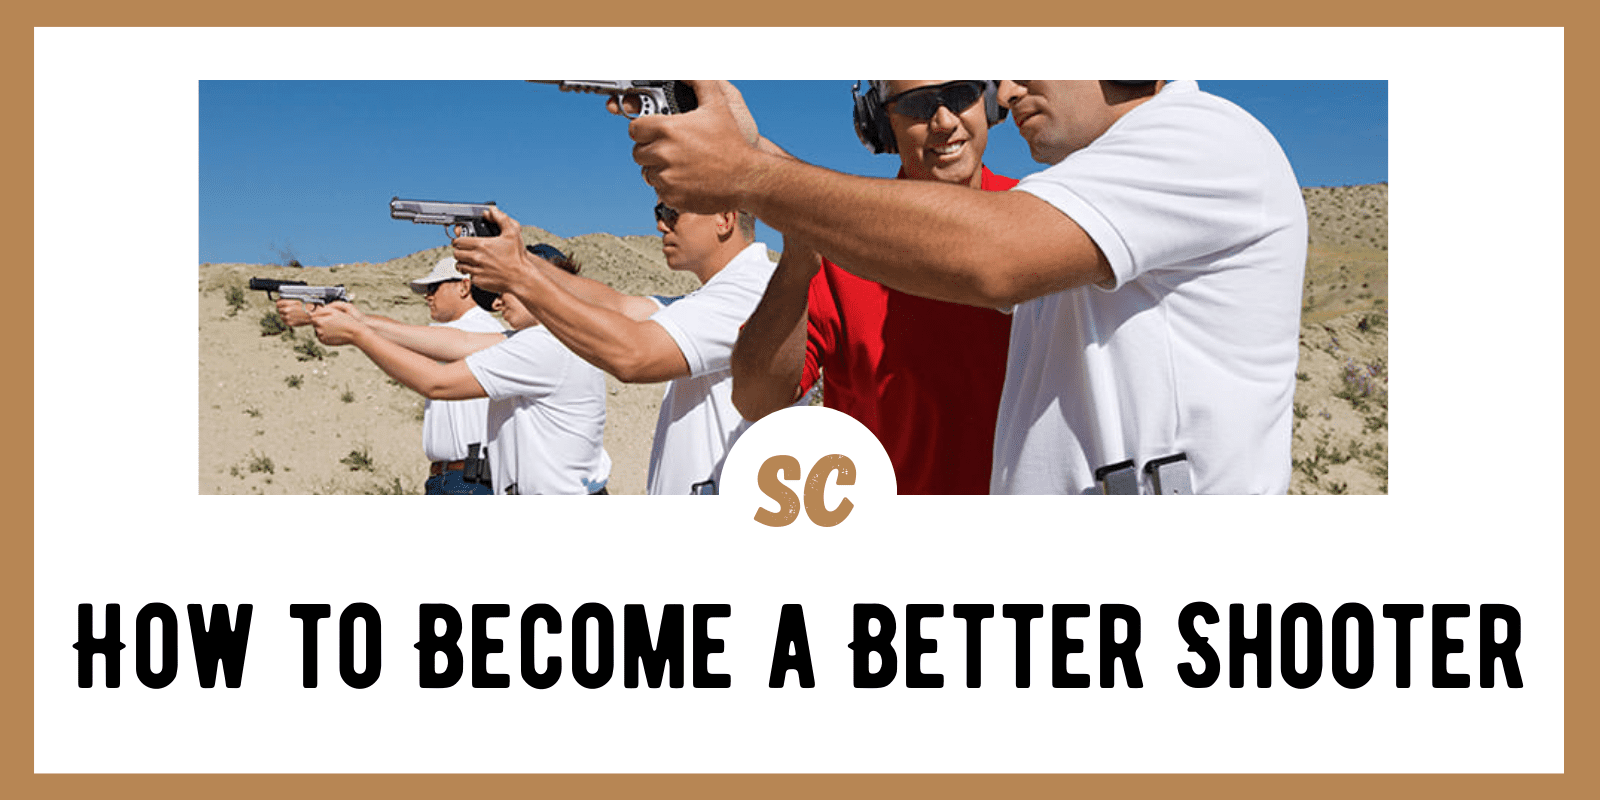 How to Become a Better Shooter